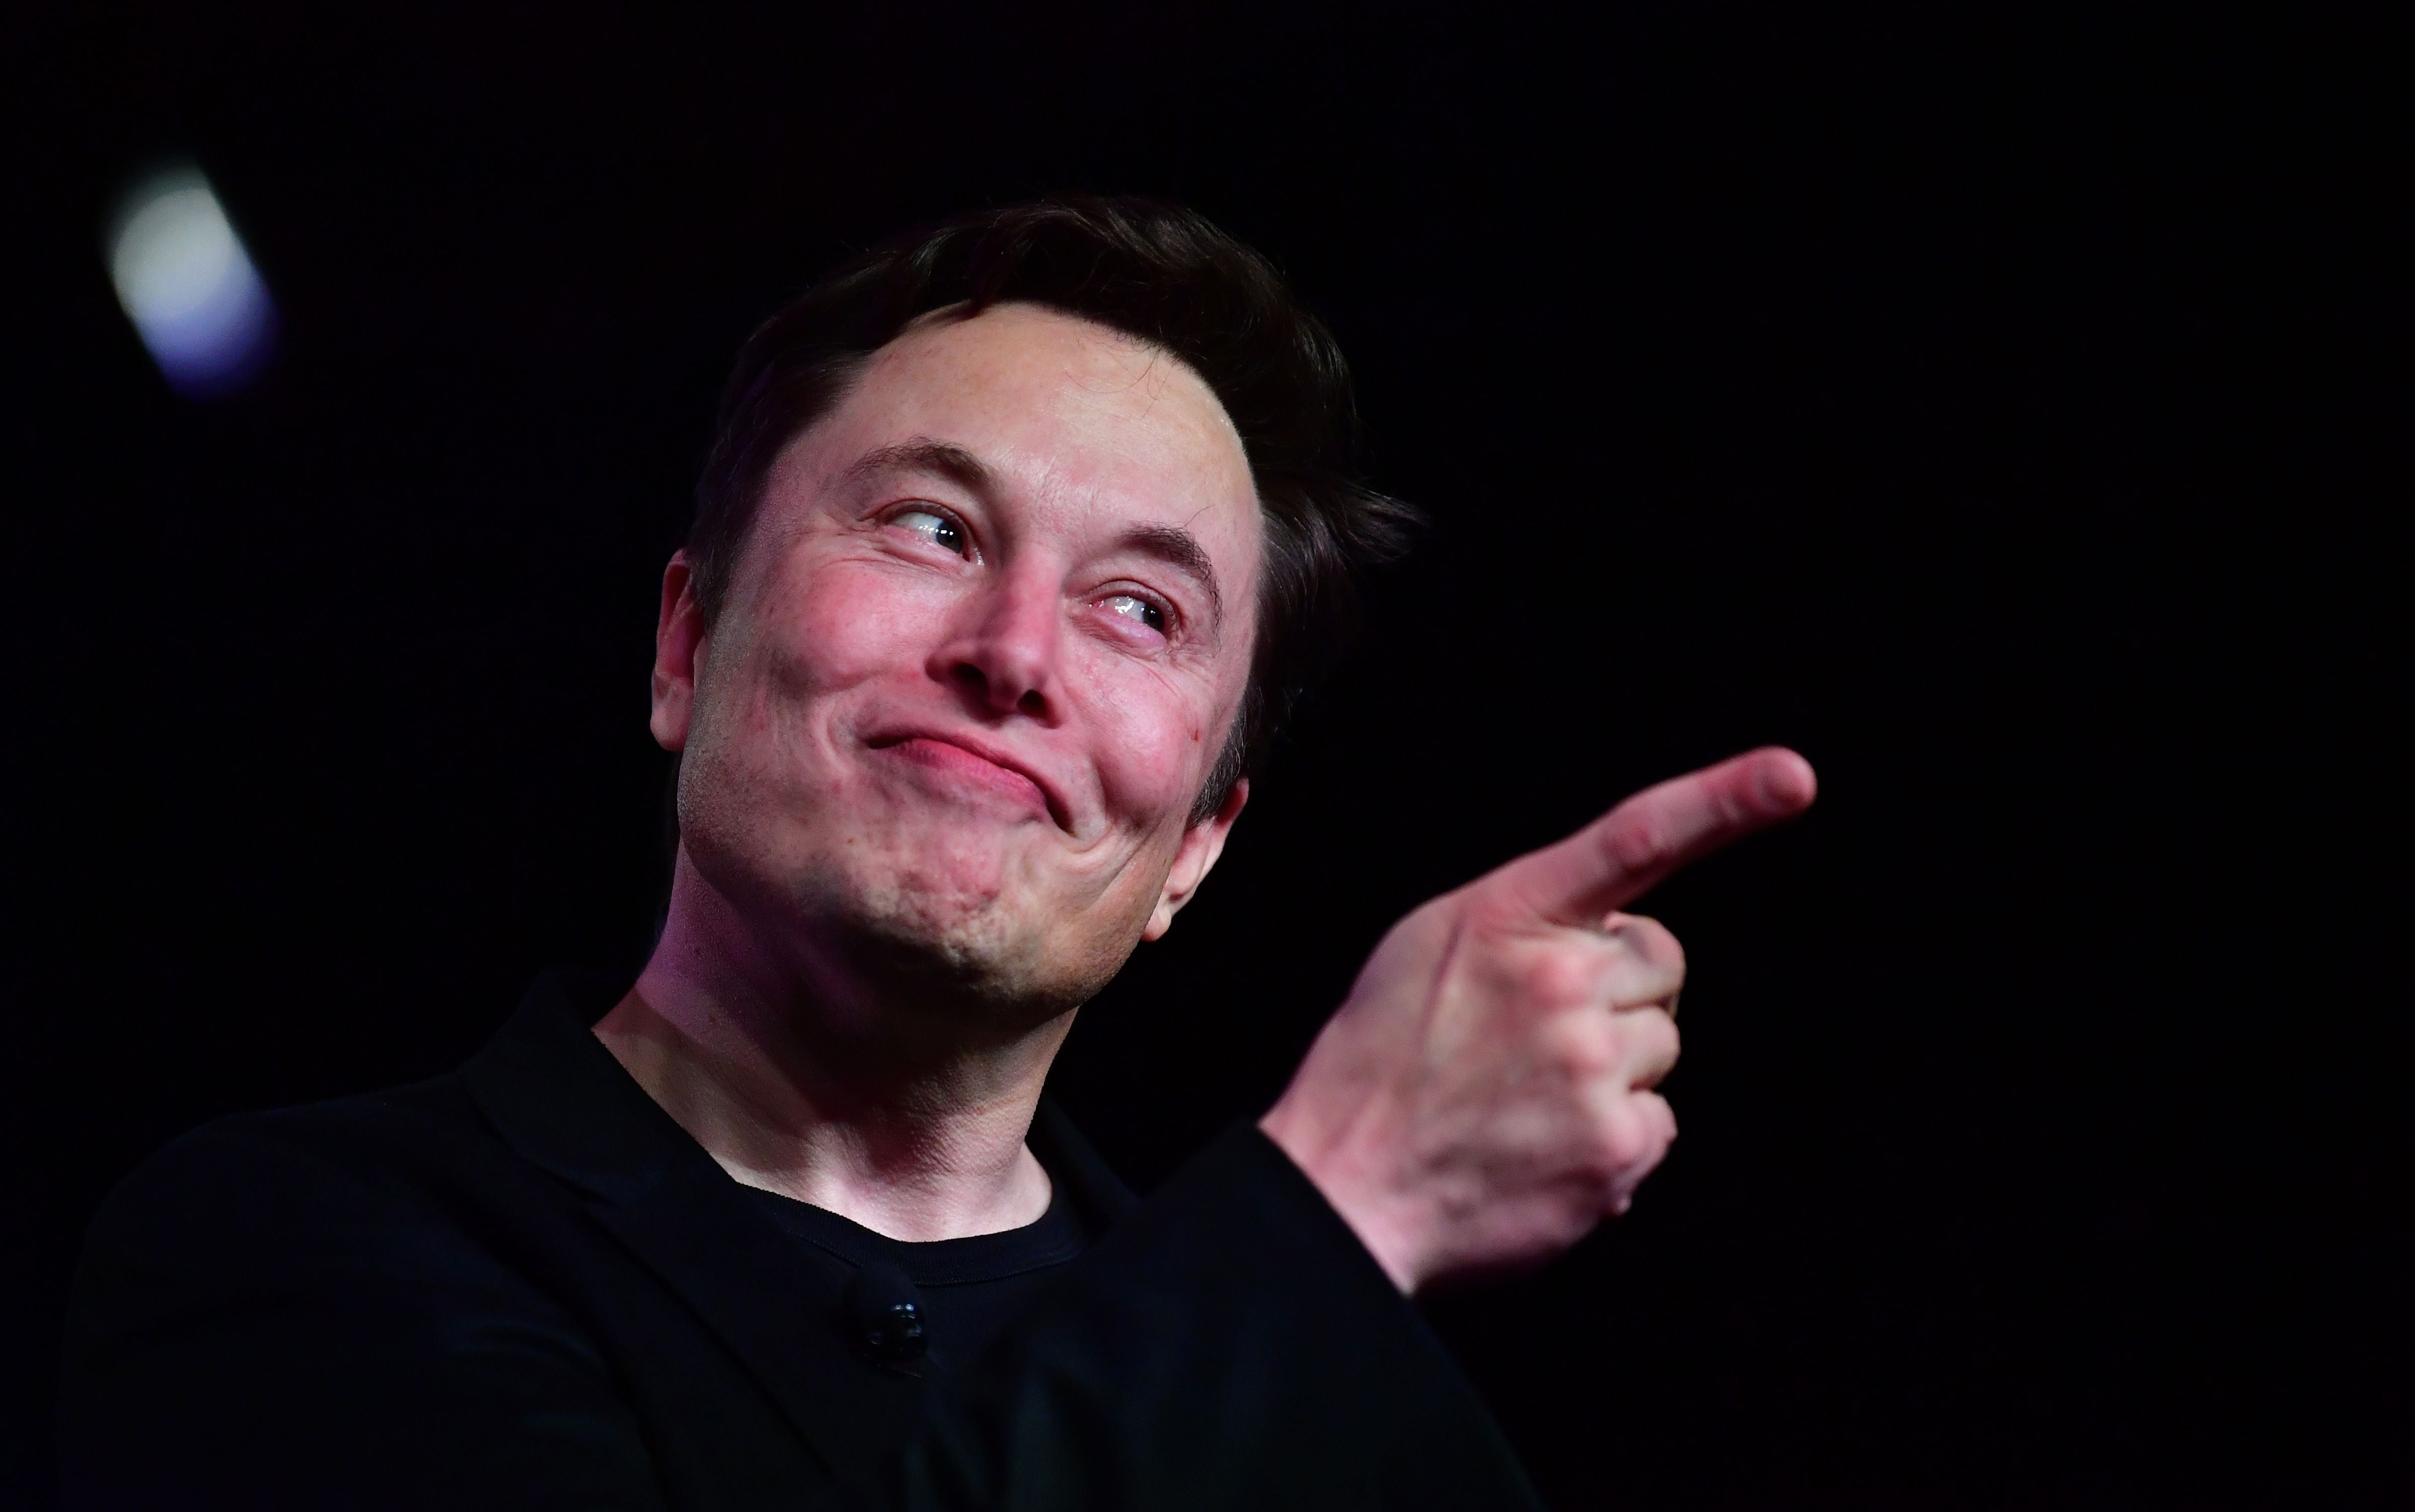 Elon Musk is now the second richest person in the world as Tesla has seen a huge boost in profits during the pandemic